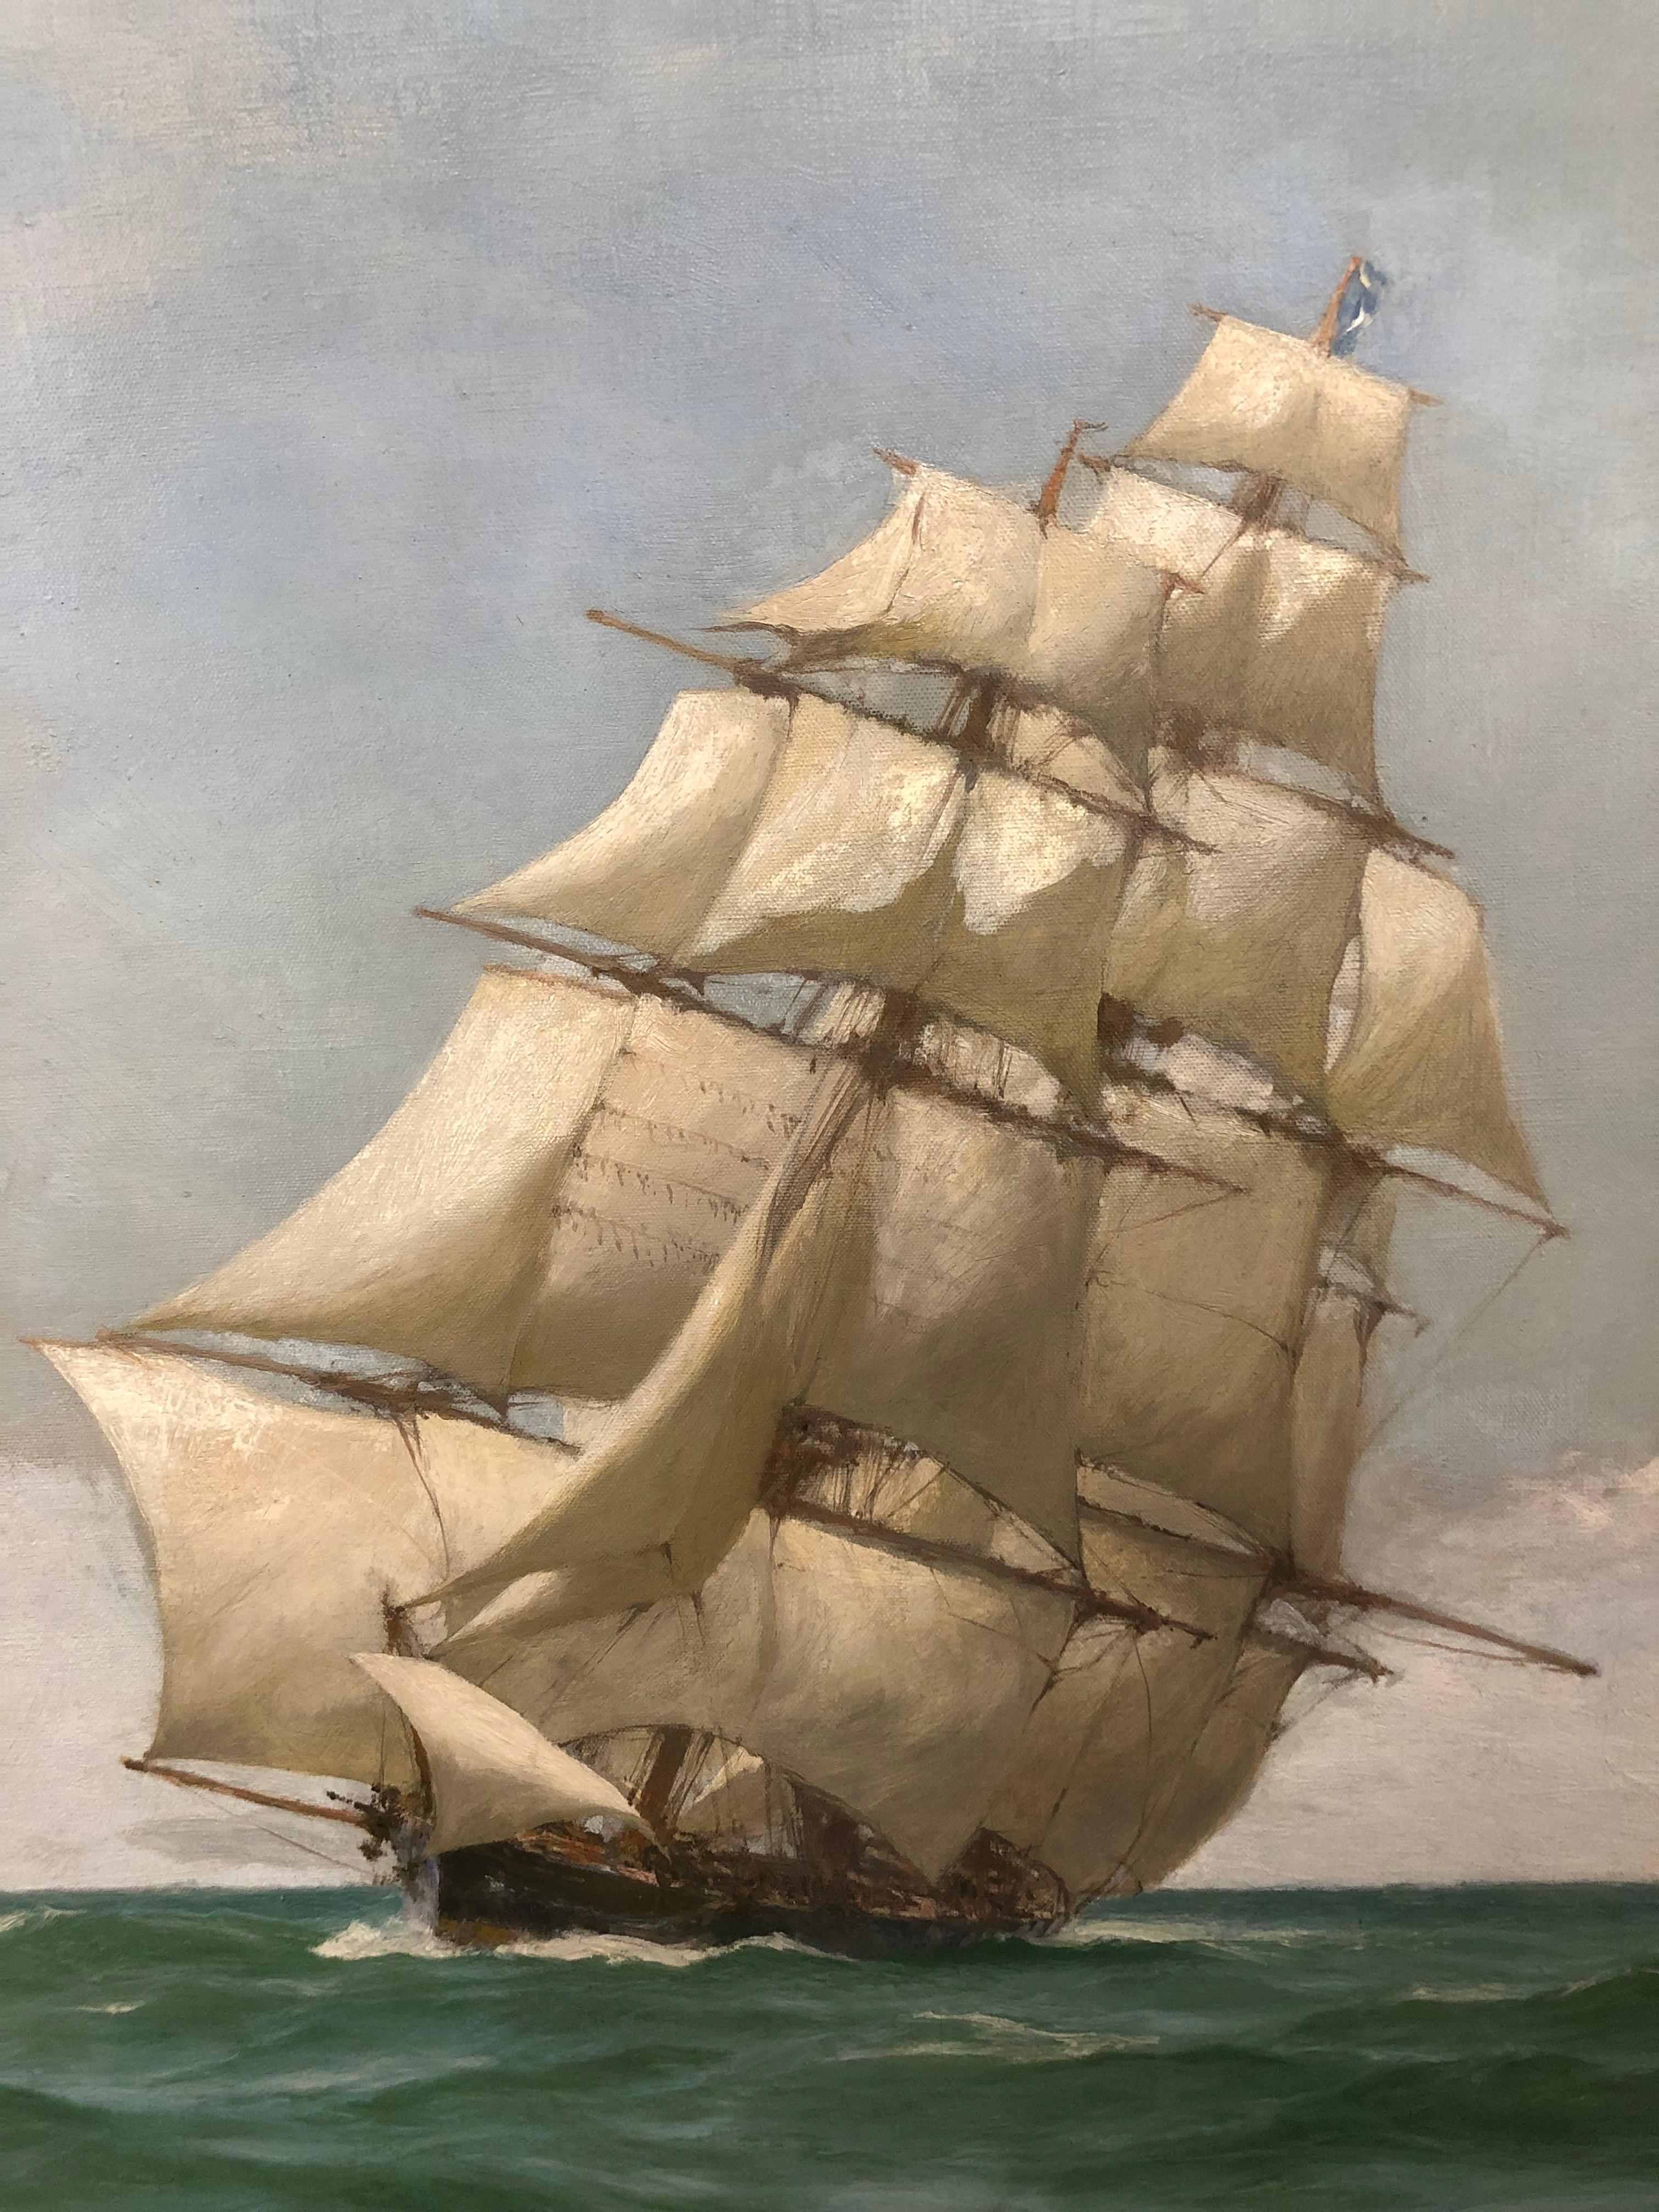 Fraser, 1858-1927 was a painter of Royal Coastal Marines, one of his titles being Marine 
 Painter-In-Ordinary to Queen Victoria. With over fifty works in the National Maritime Museum he is one of the more famed maritime artists. This captivating